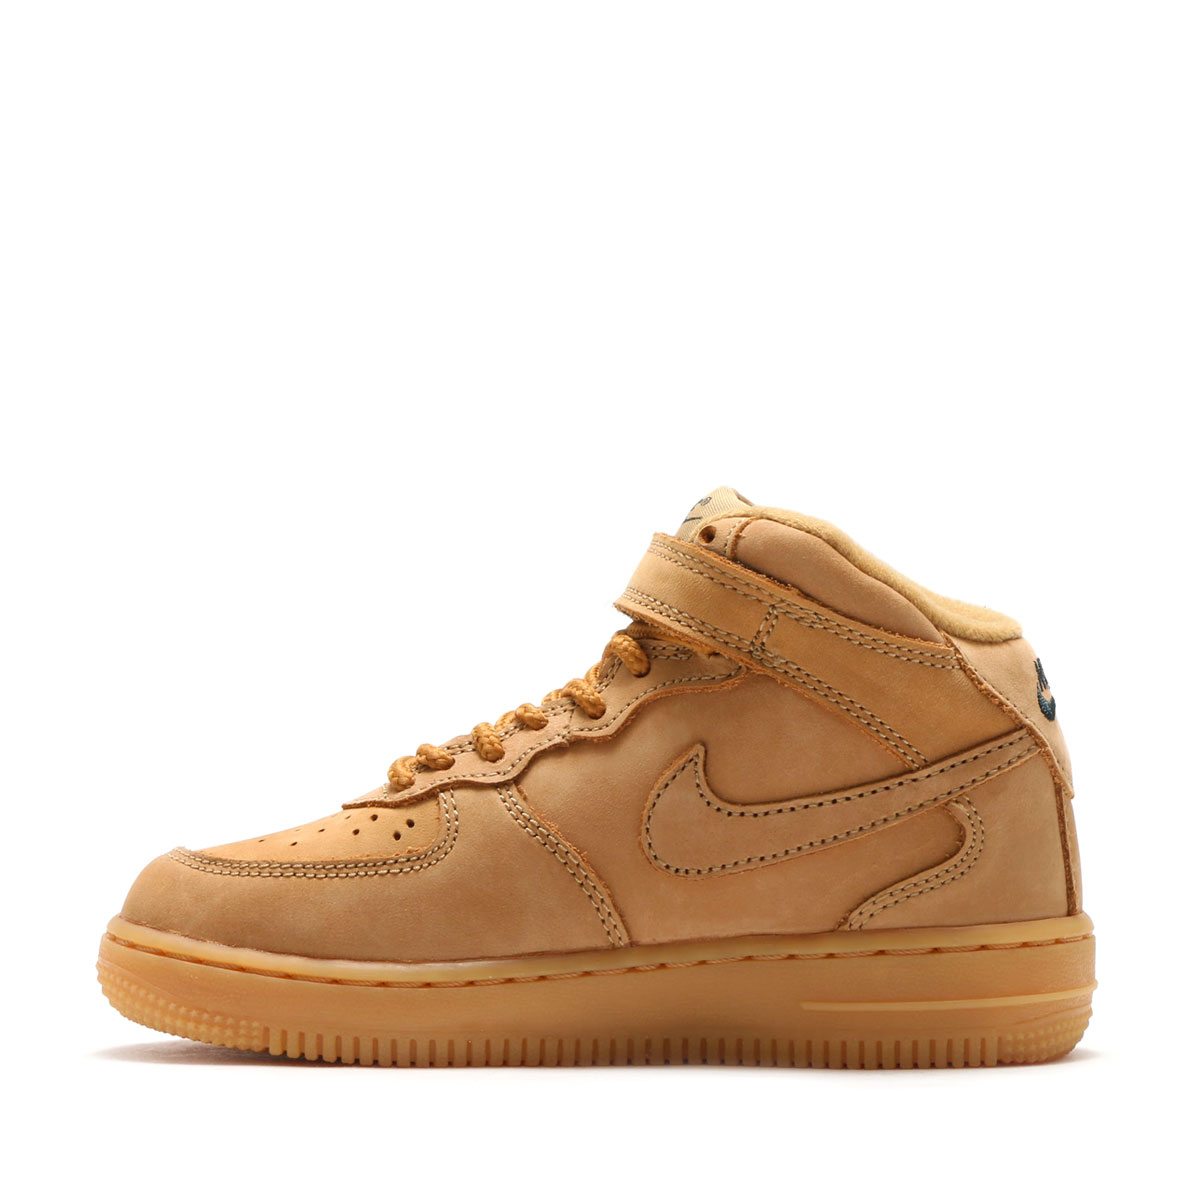 Nike Air Force 1 Mid PS "Wheat"